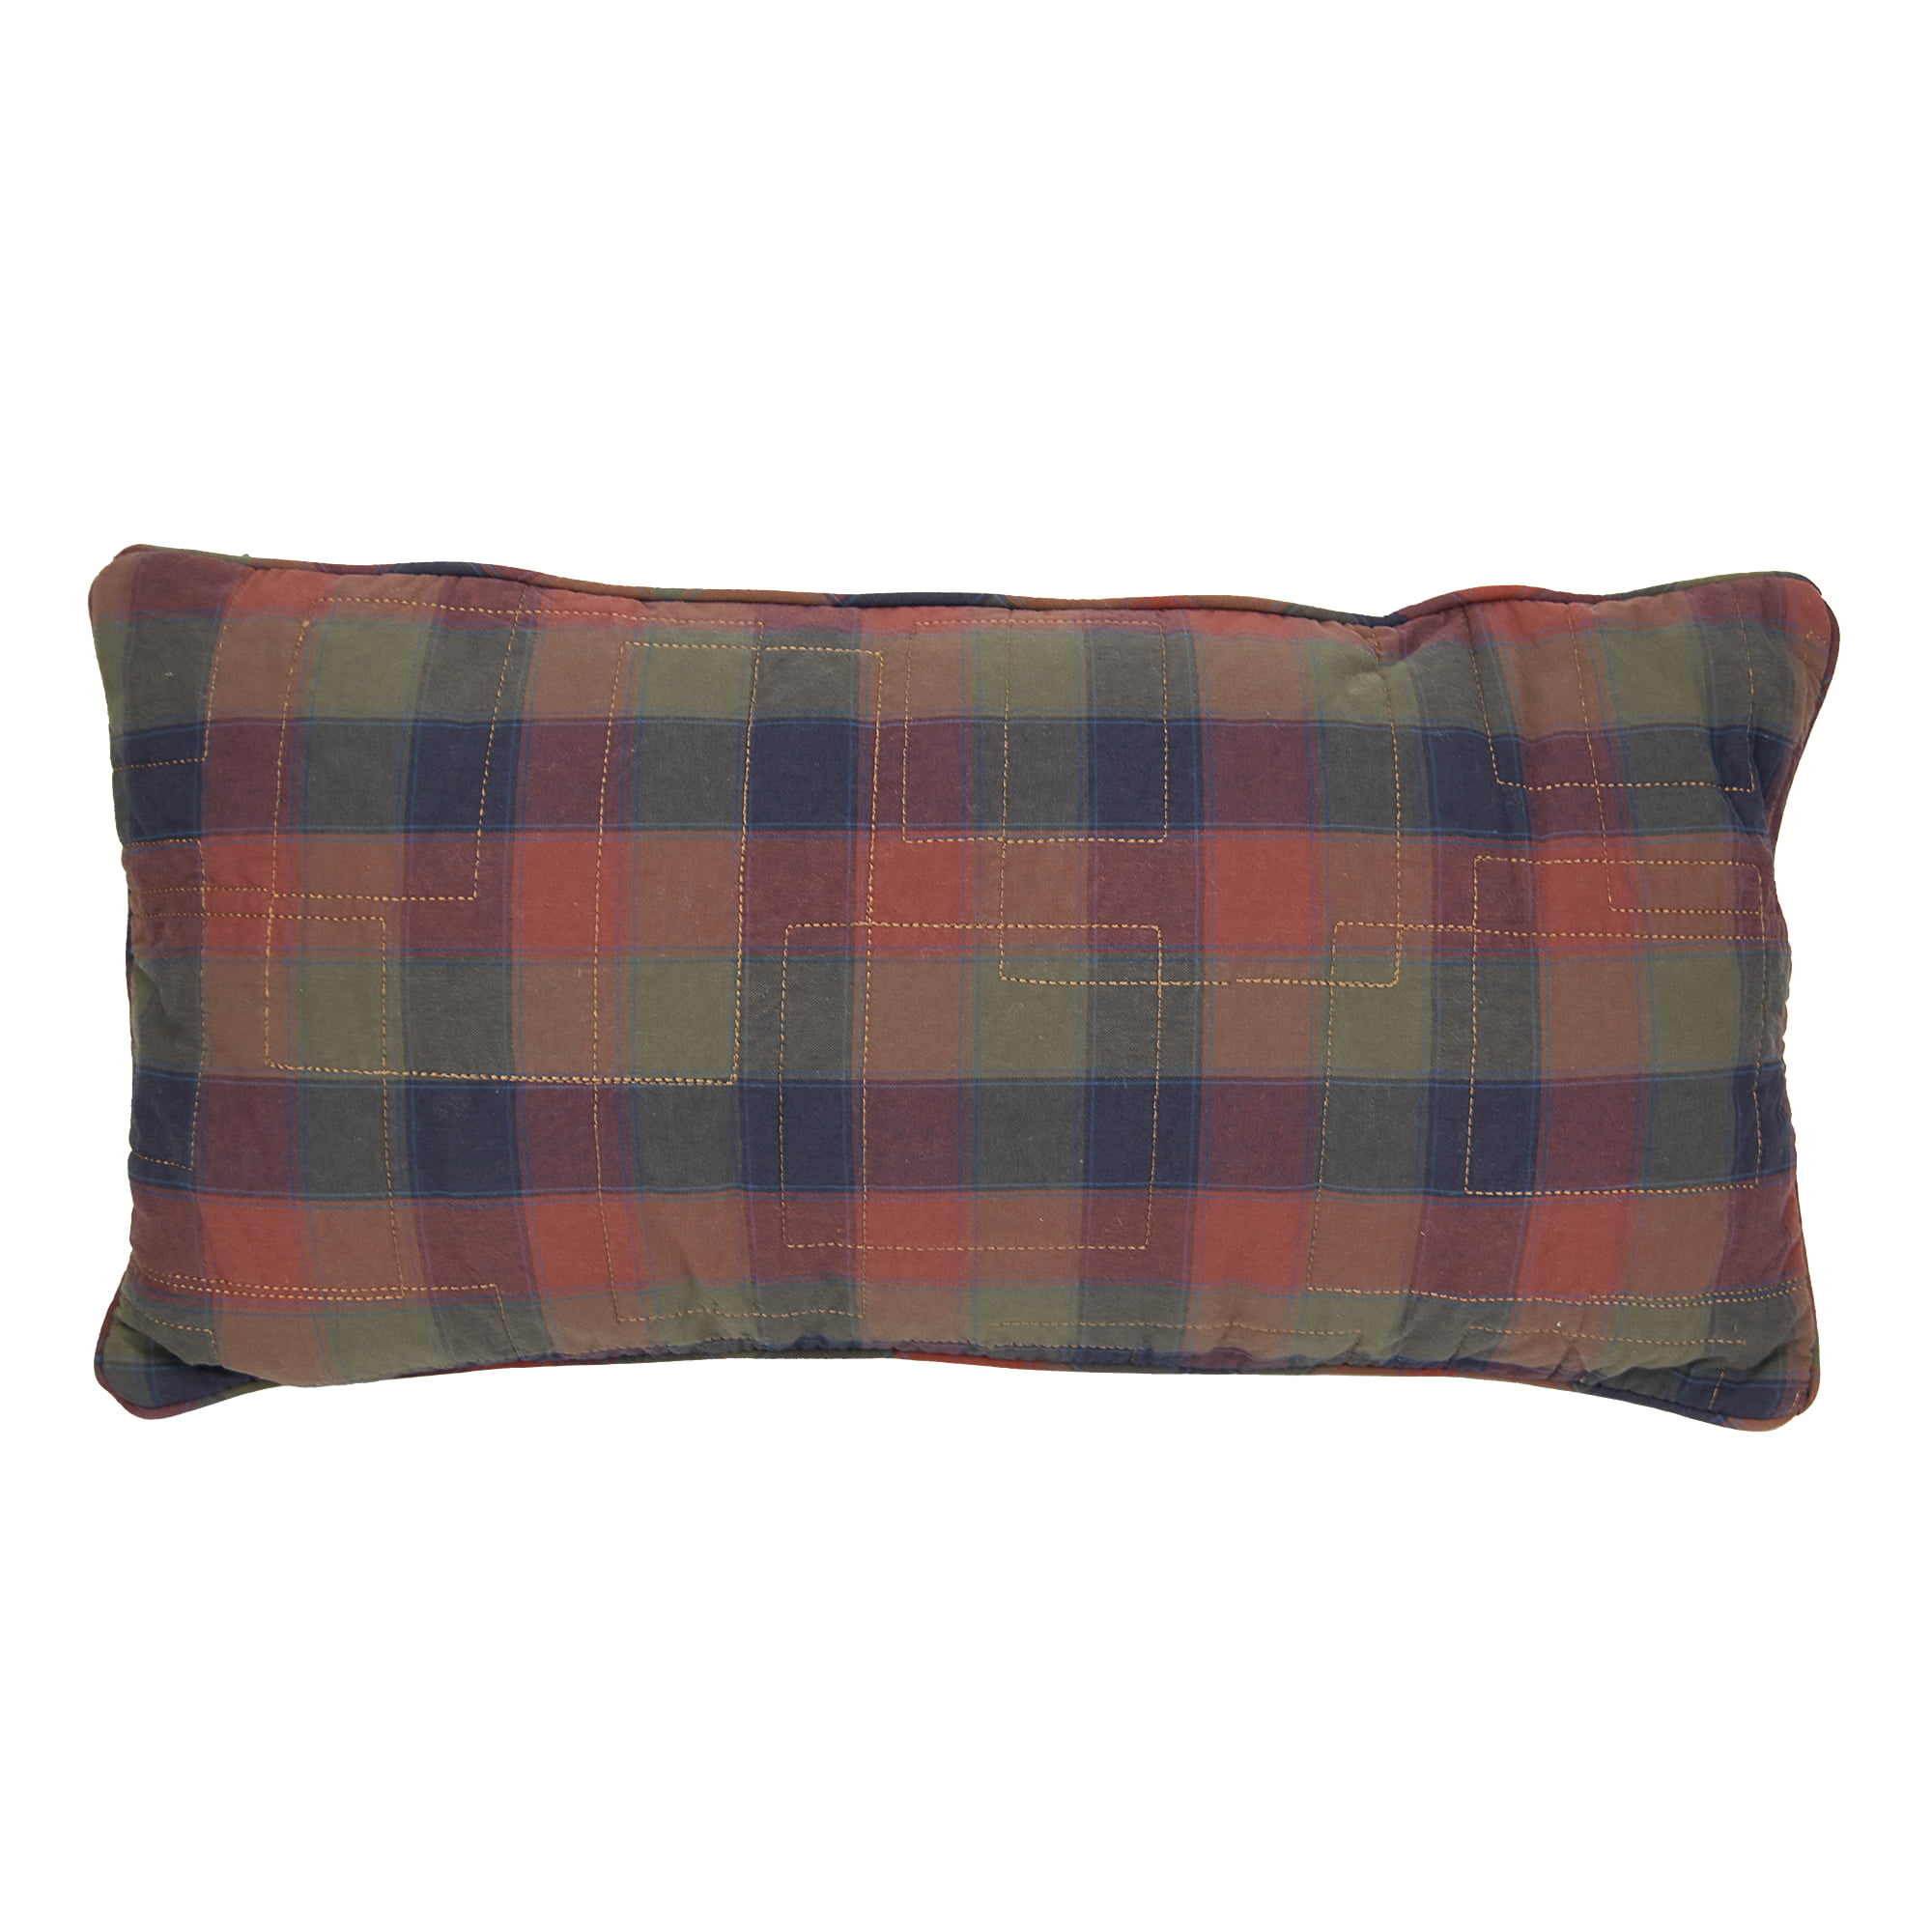 94717 11 X 22 In. Campfire Square Rectangle Decorative Pillow - Green, Rust Red & Tan